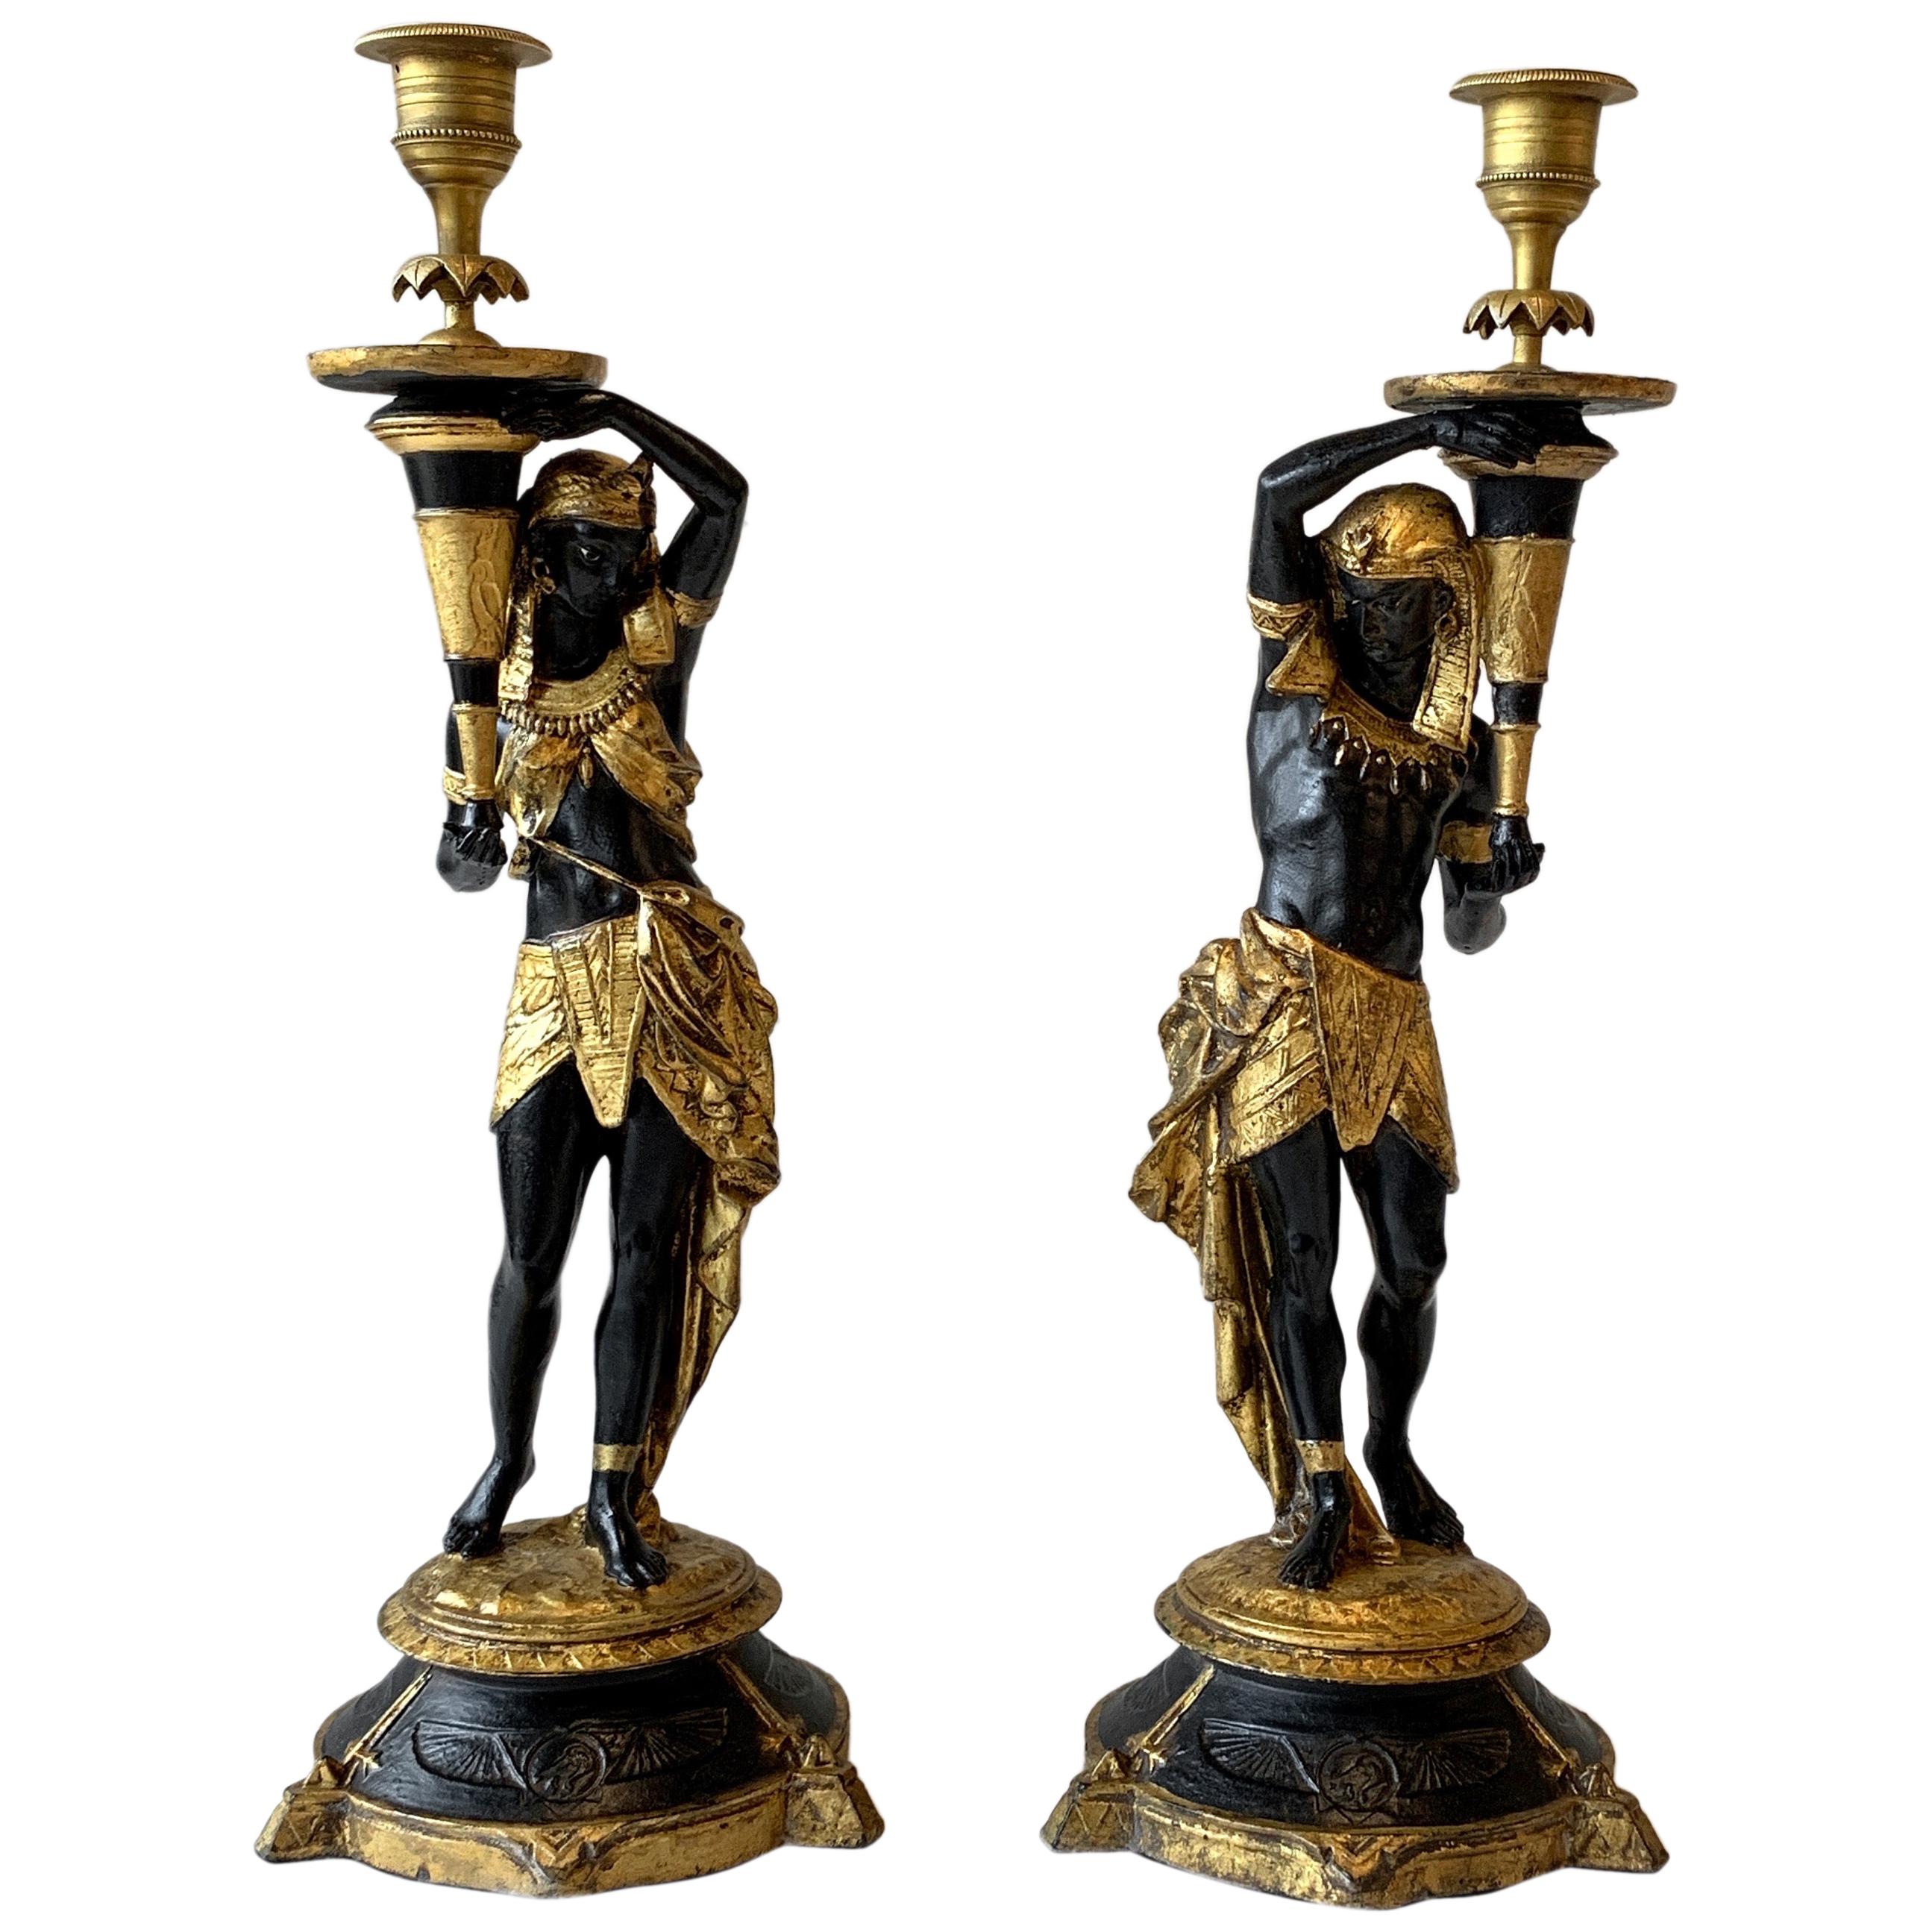 Pair of Egyptian Revival Candlesticks